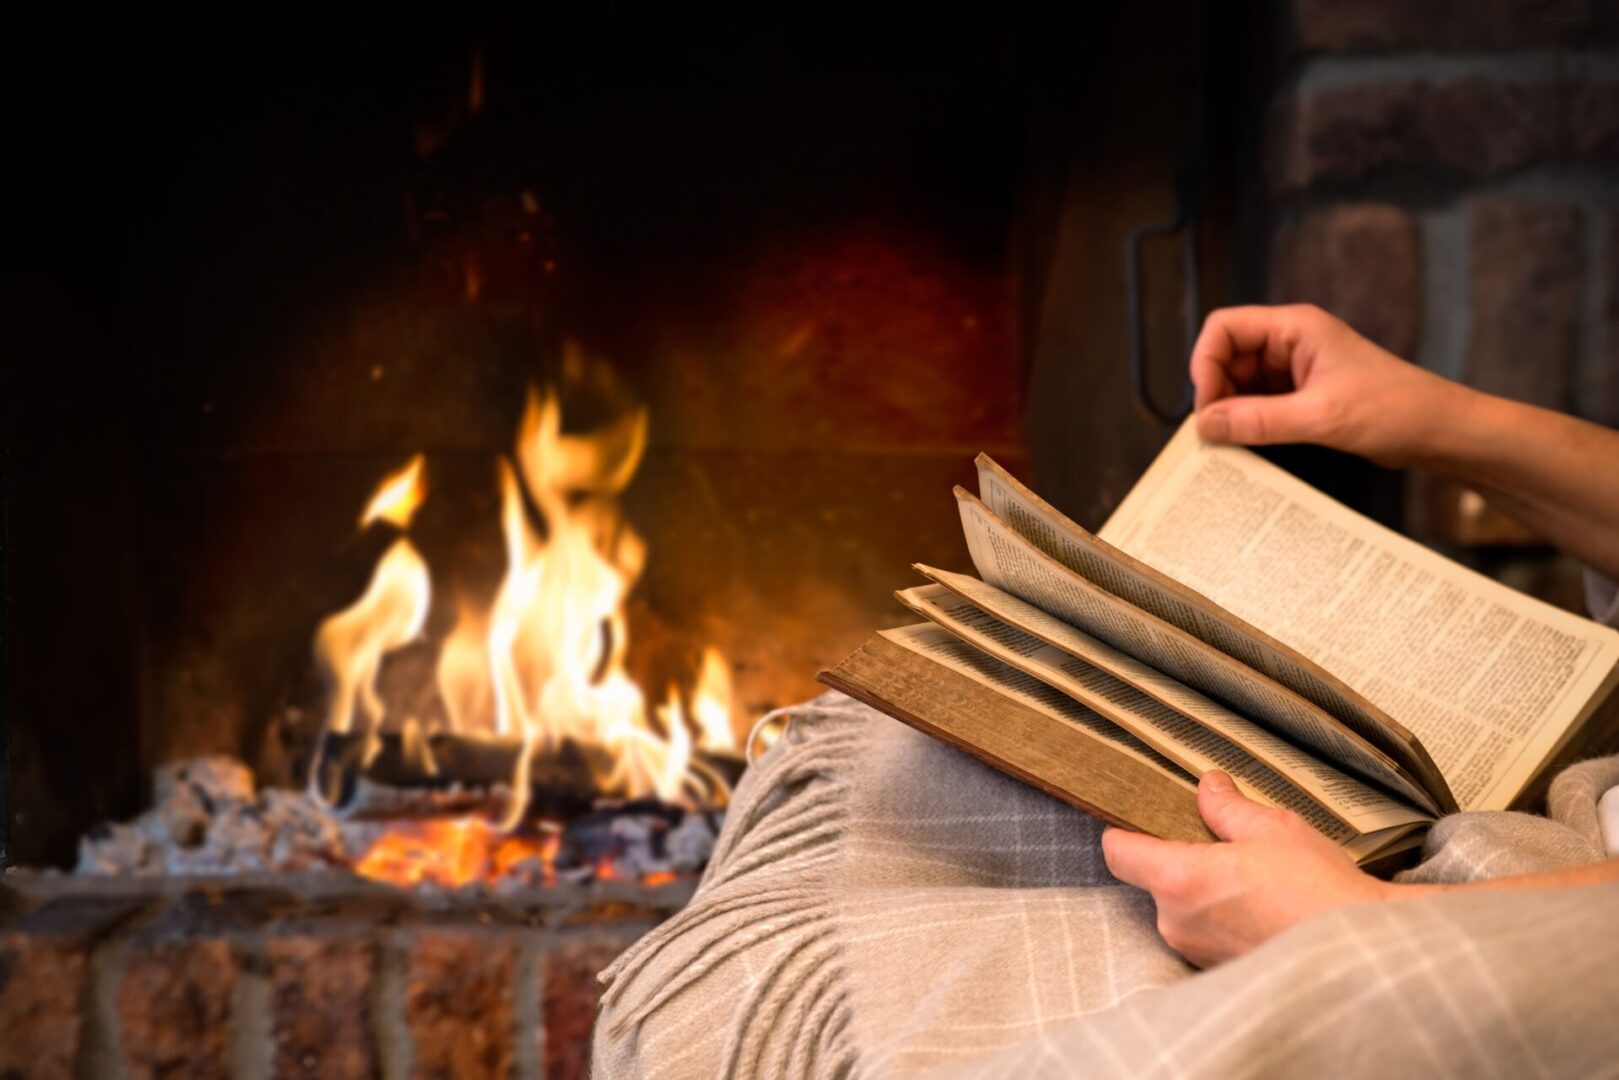 A person is reading by the fire